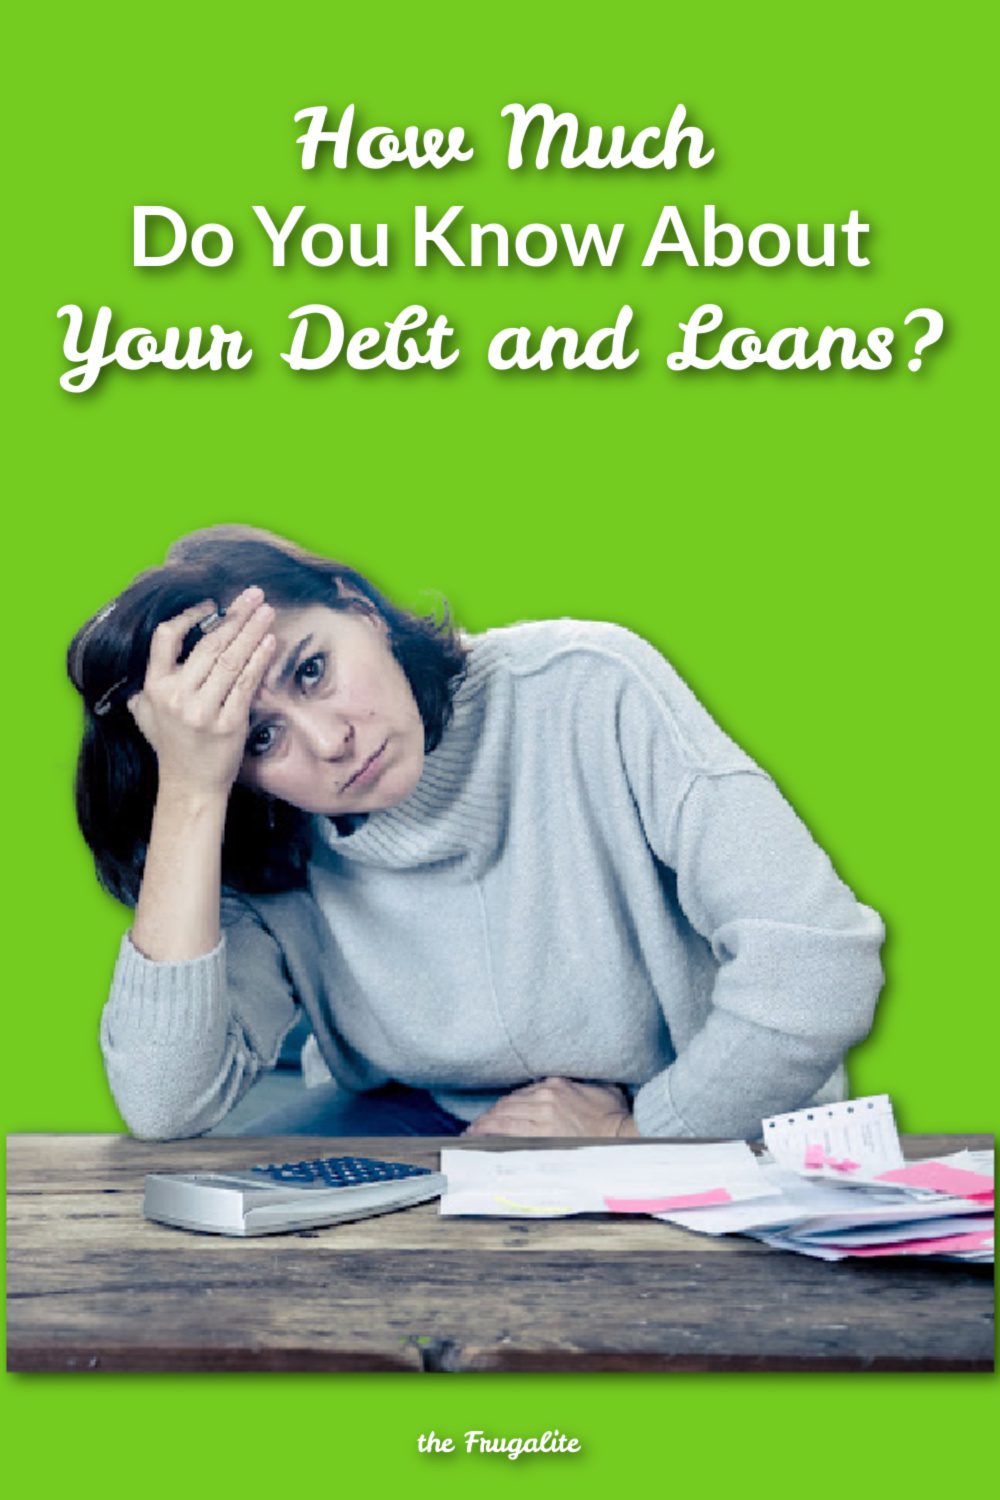 How Much Do You Know About Your Debt and Loans?